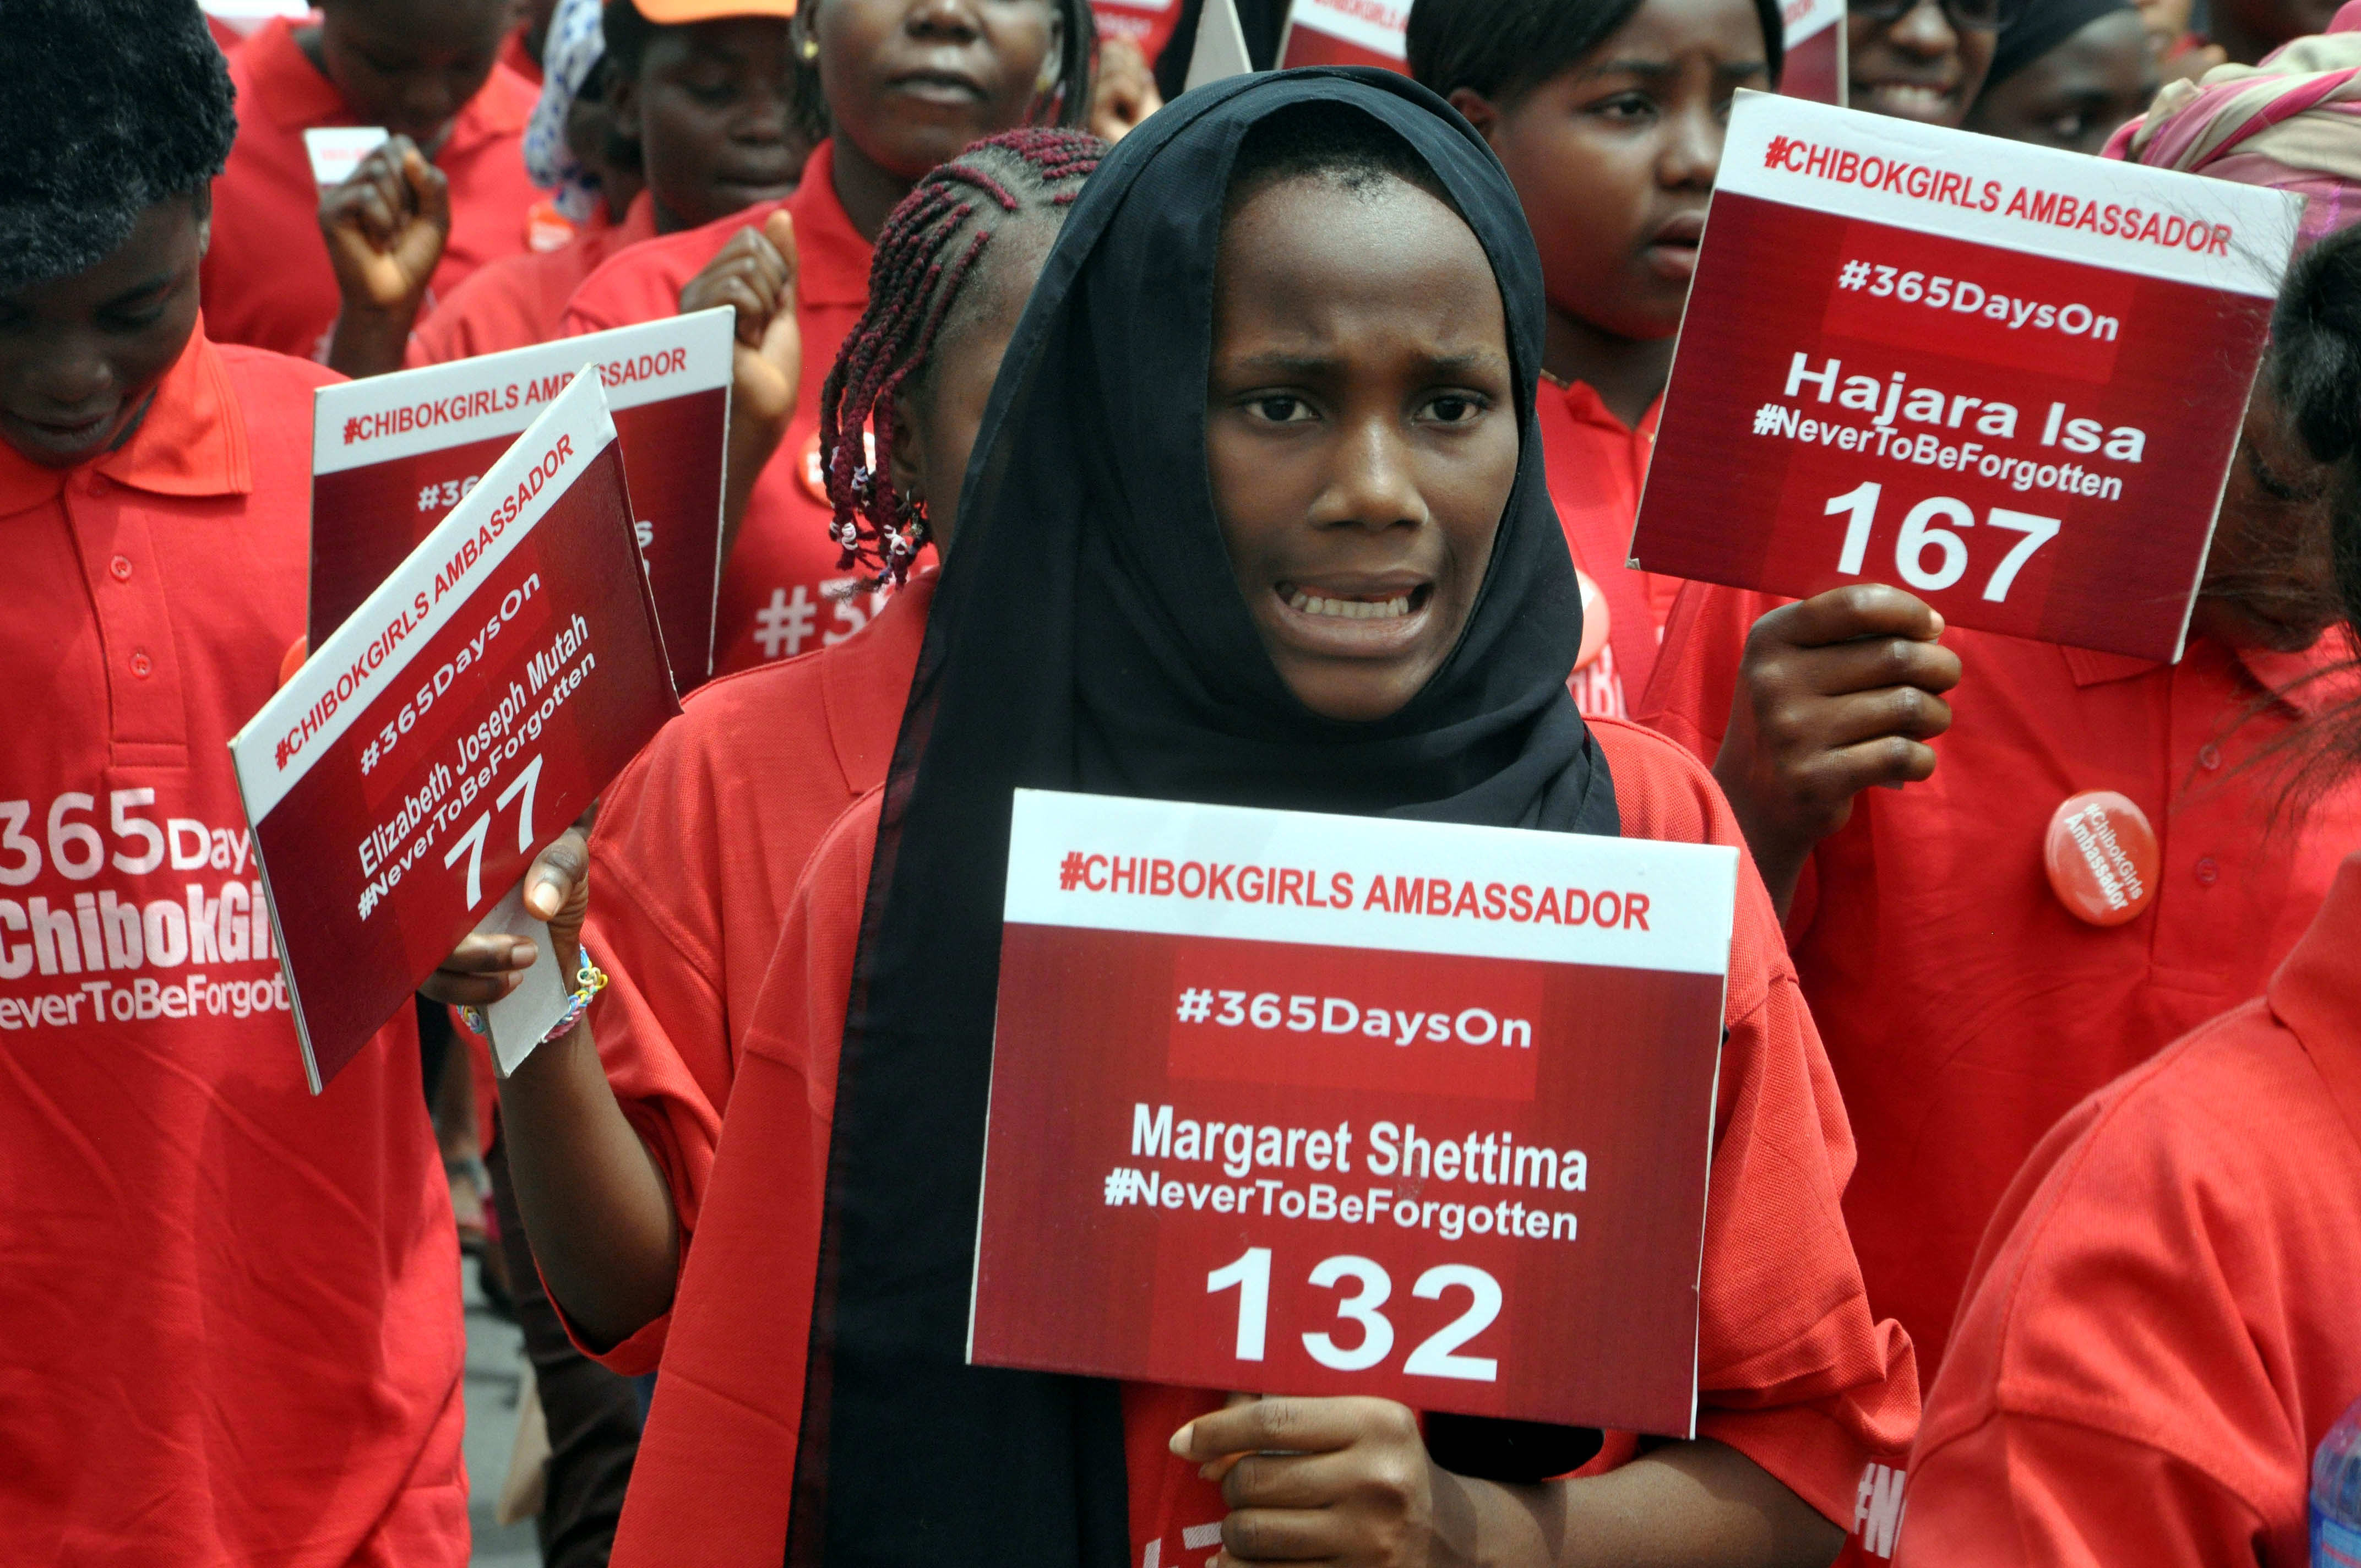 Children take part in a demonstration in Abuja on 14 April, marking one year since the abduction of 219 schoolgirls.